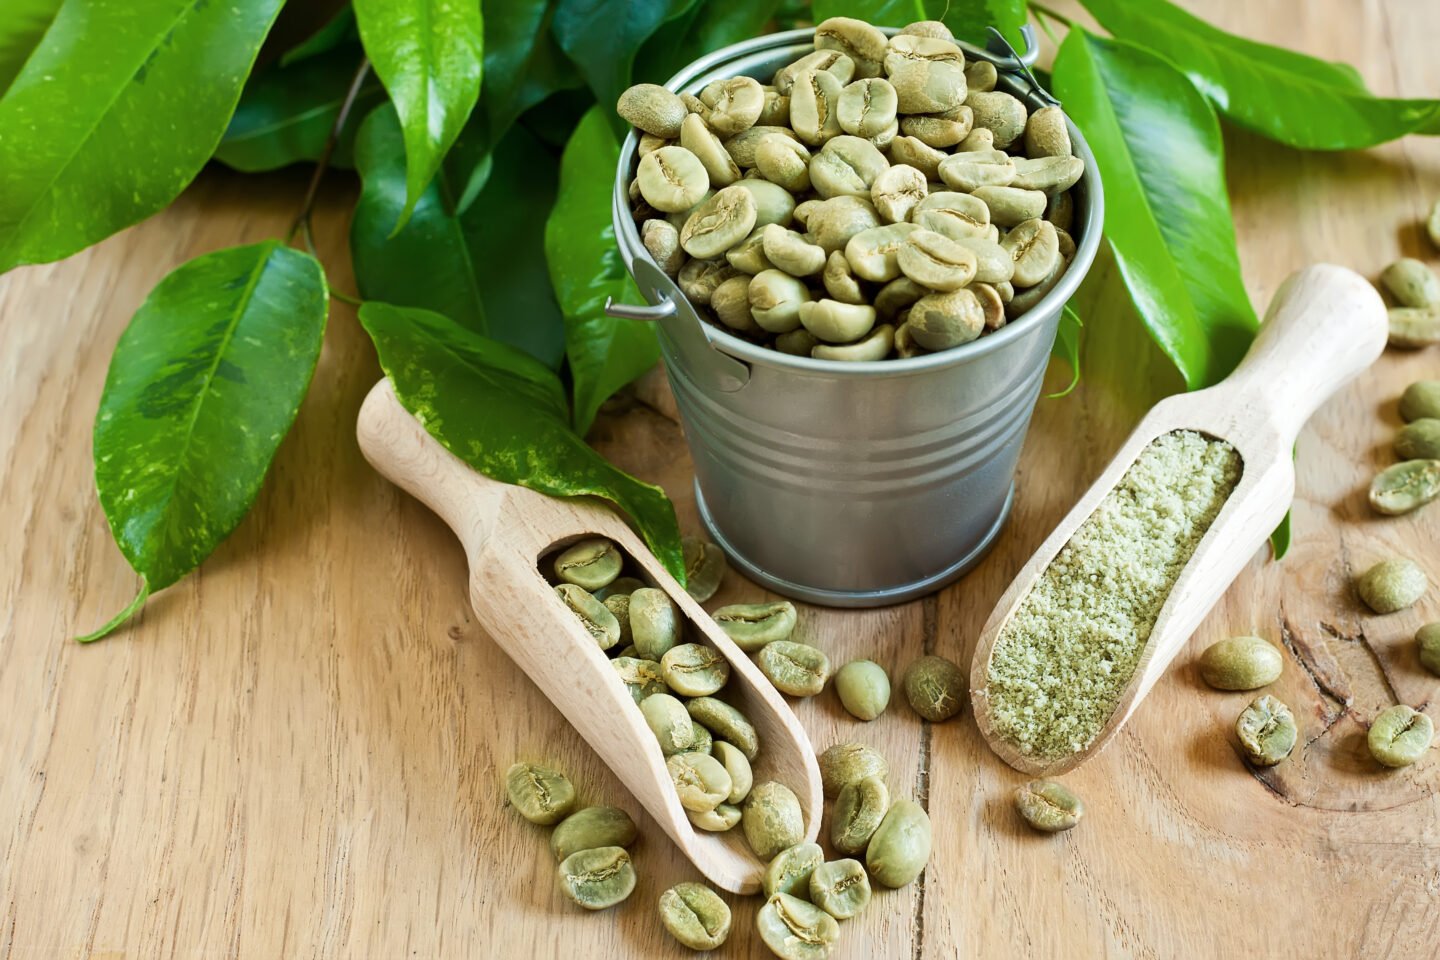 green-coffee-beans-on-a-small-pail-and-wooden-spoons